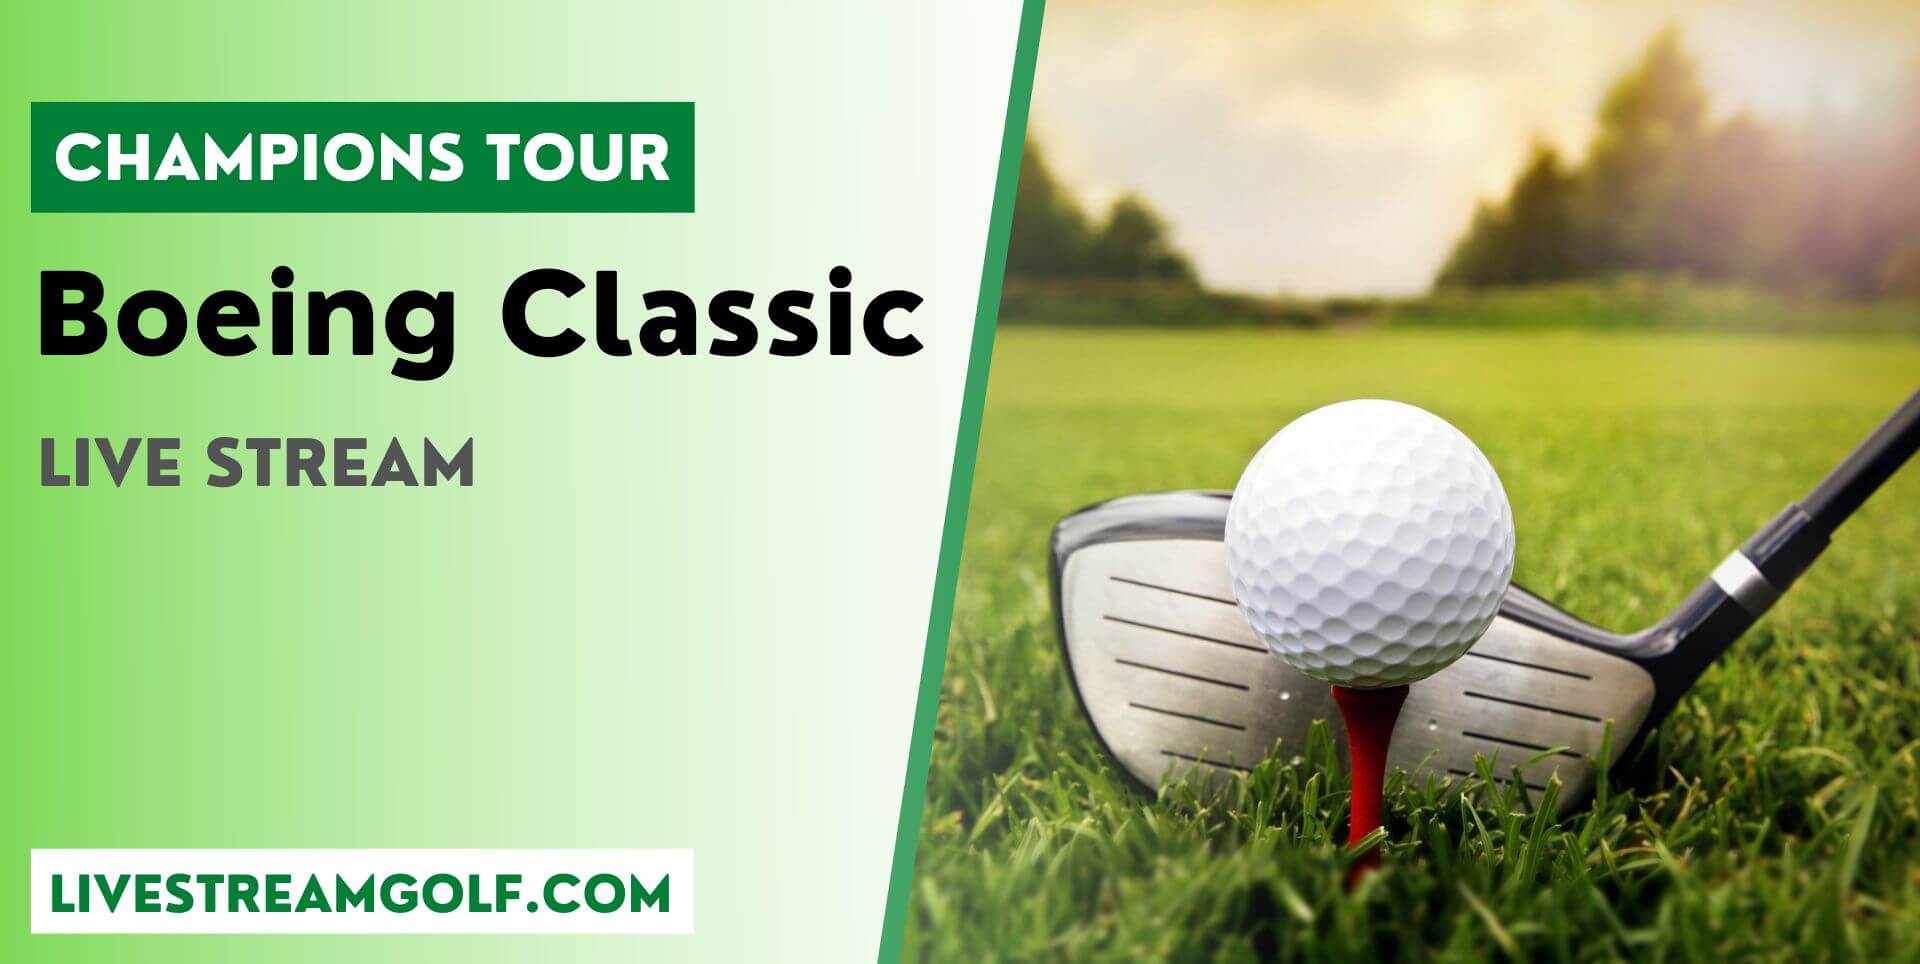 Boeing Classic Day 3 Live Stream: Champions Tour 2022